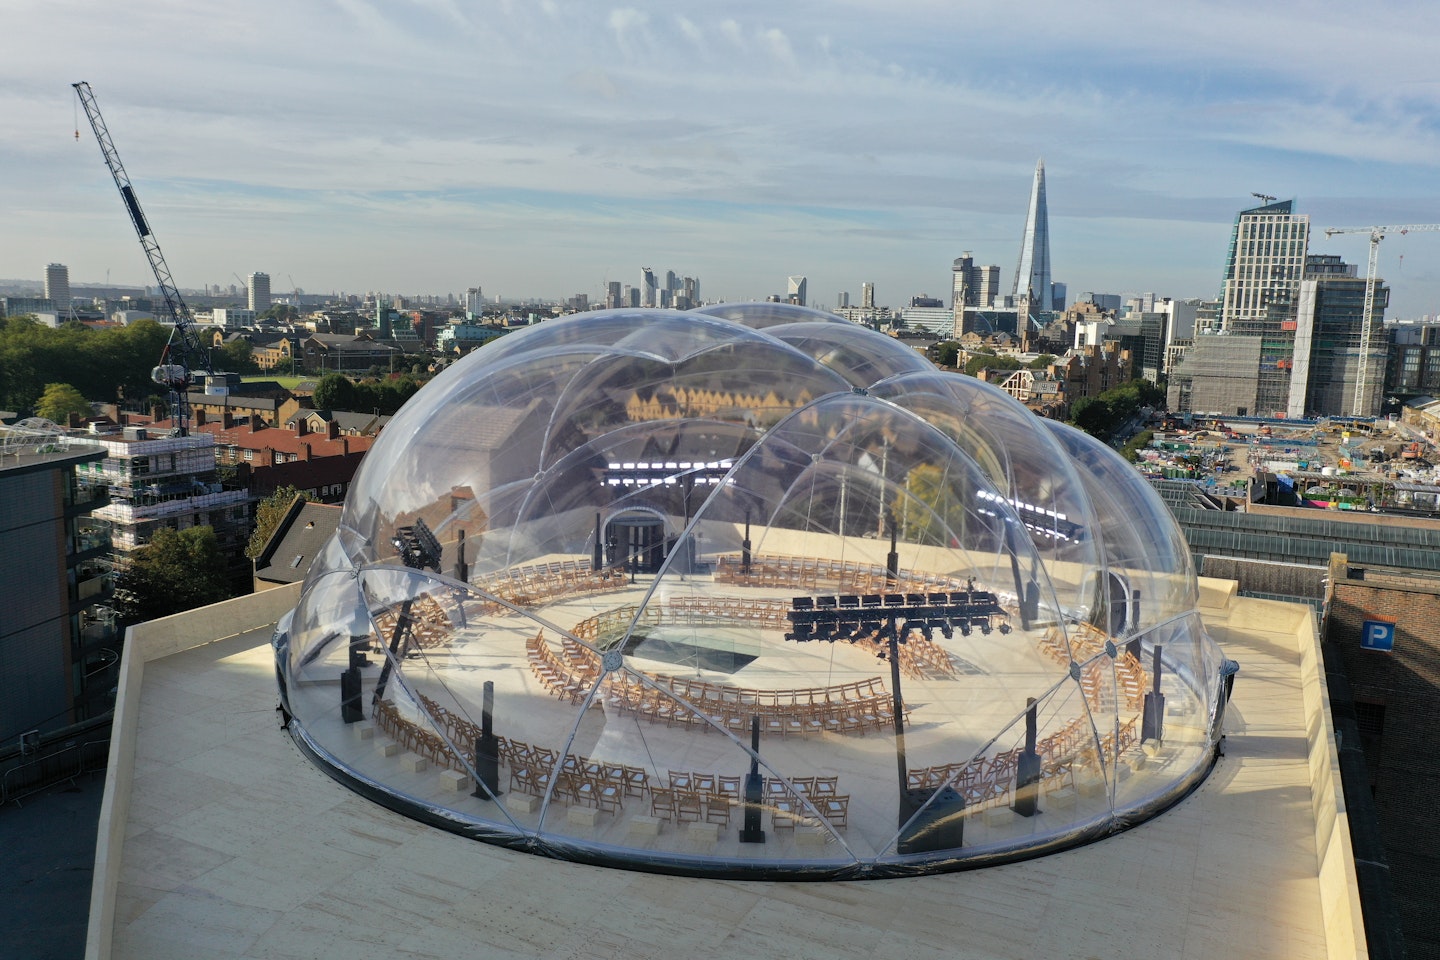 The show venue, a bubble on top of a car park, for Alexander McQueen